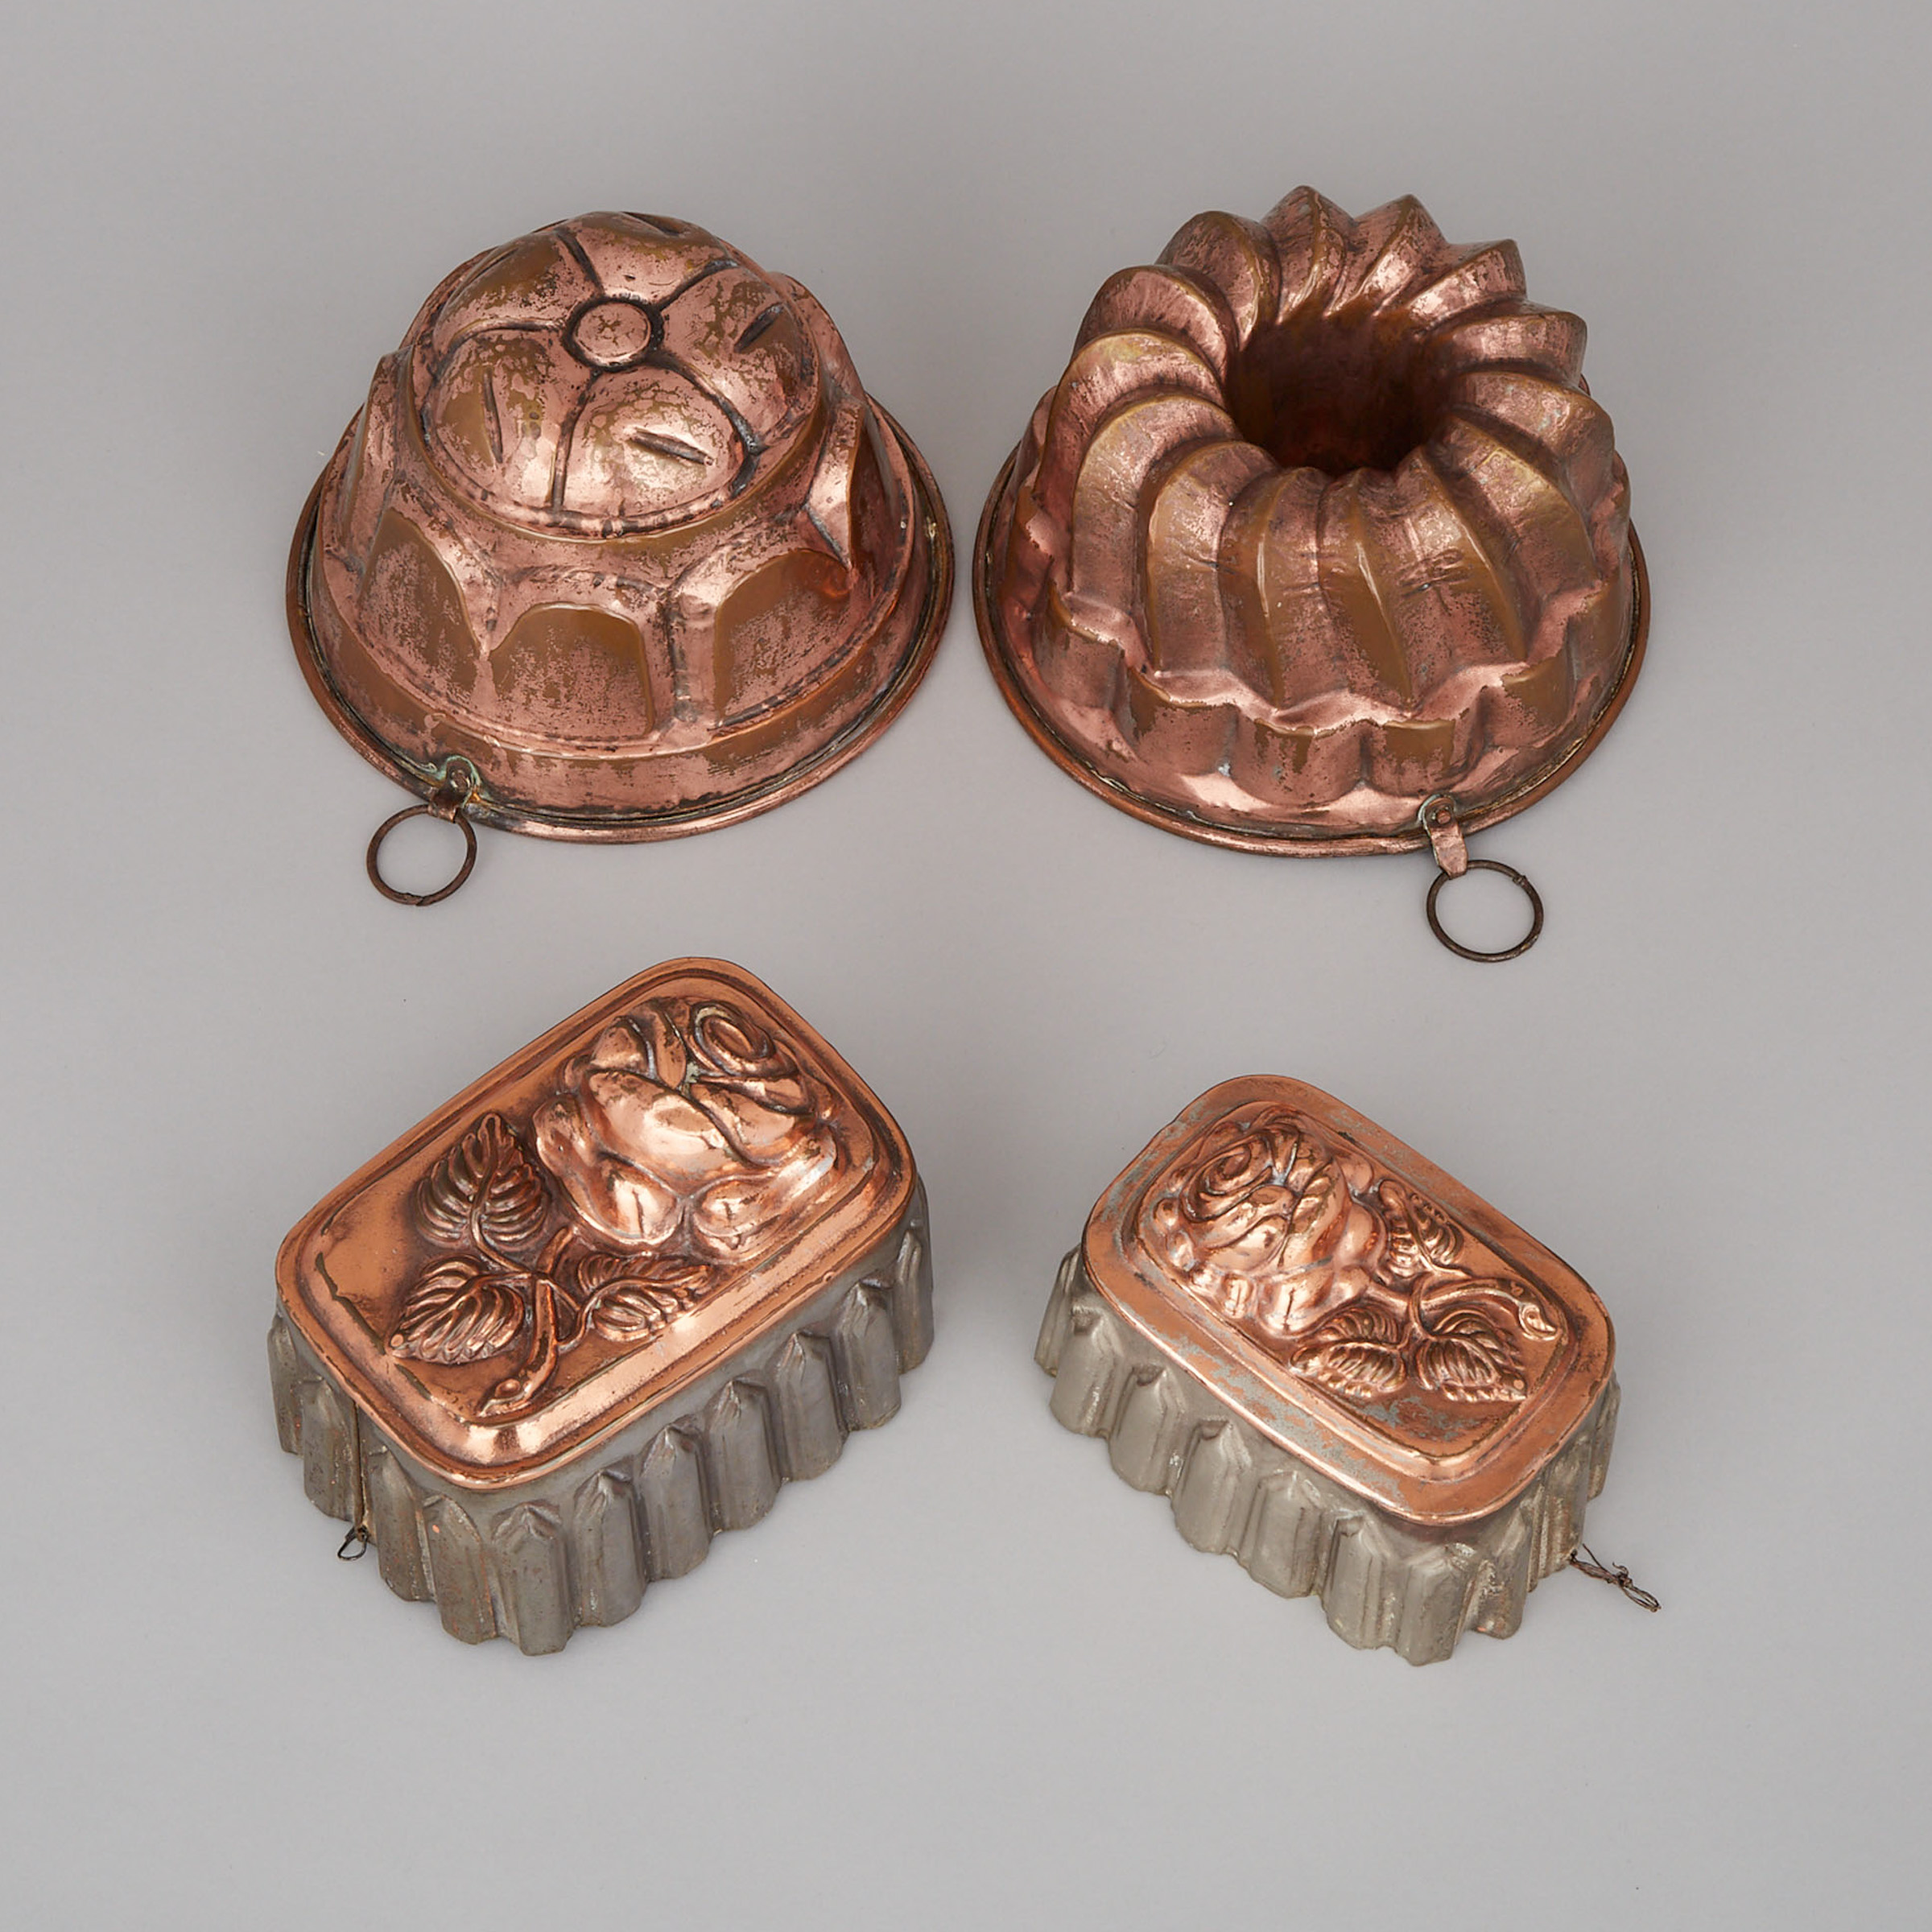 Four Victorian Copper Jelly Moulds, 19th century